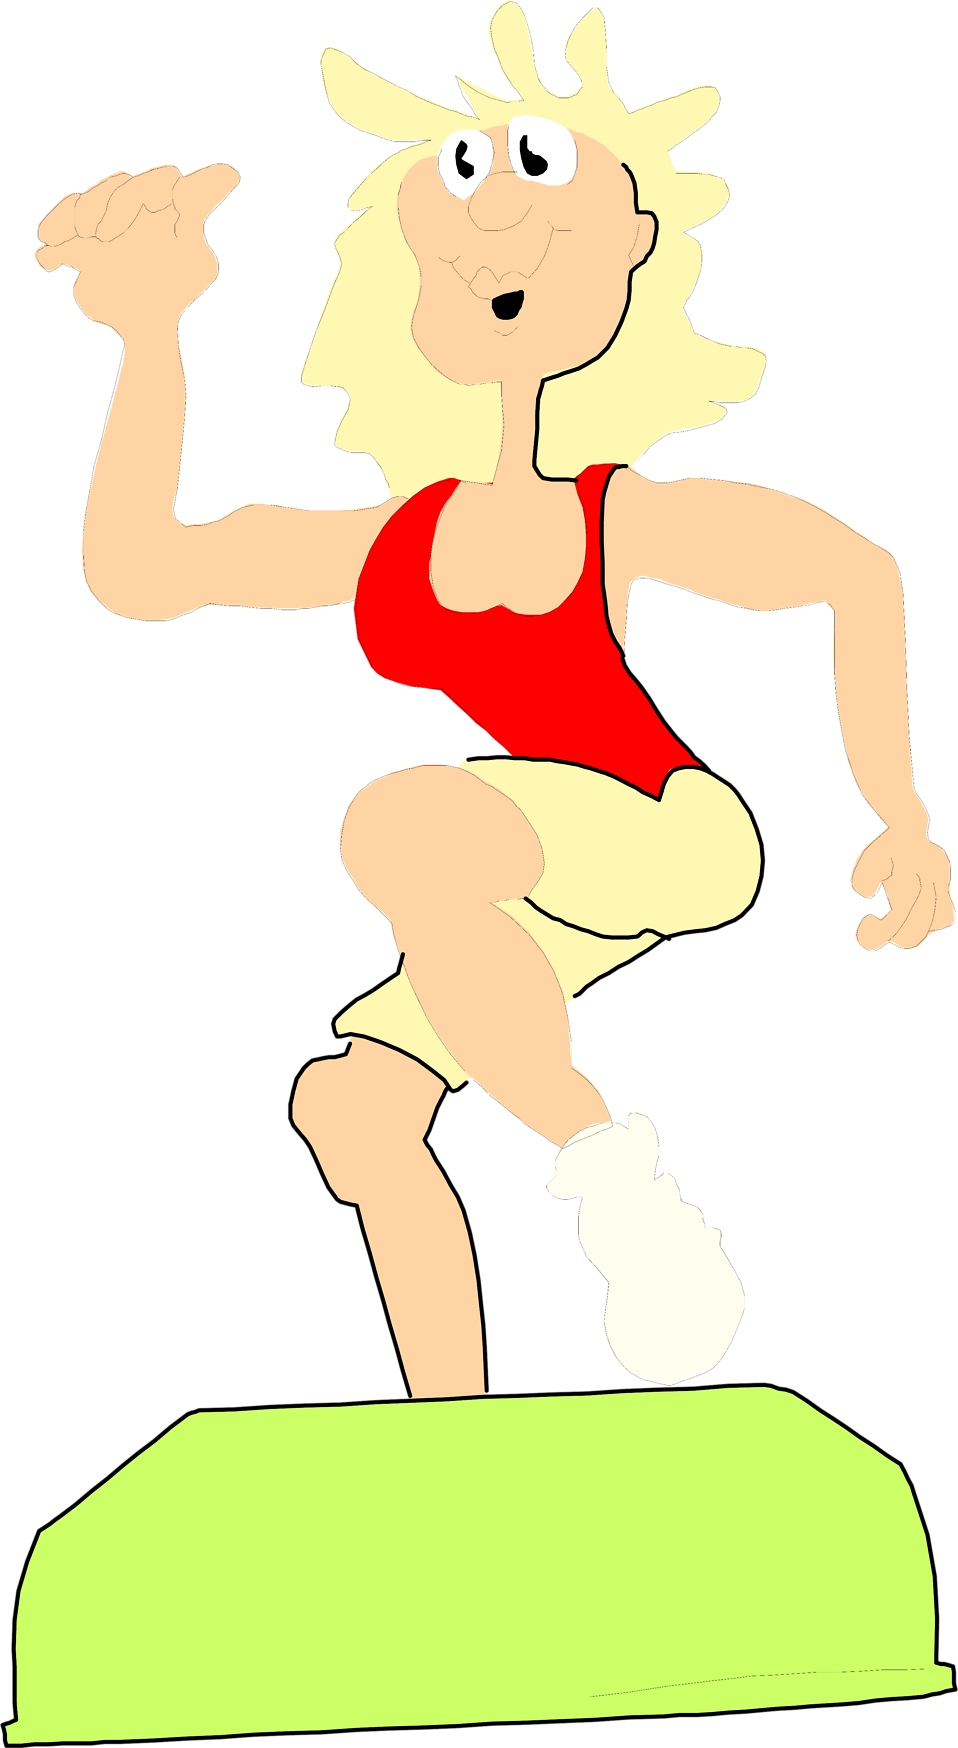 free exercise clip art images - photo #50